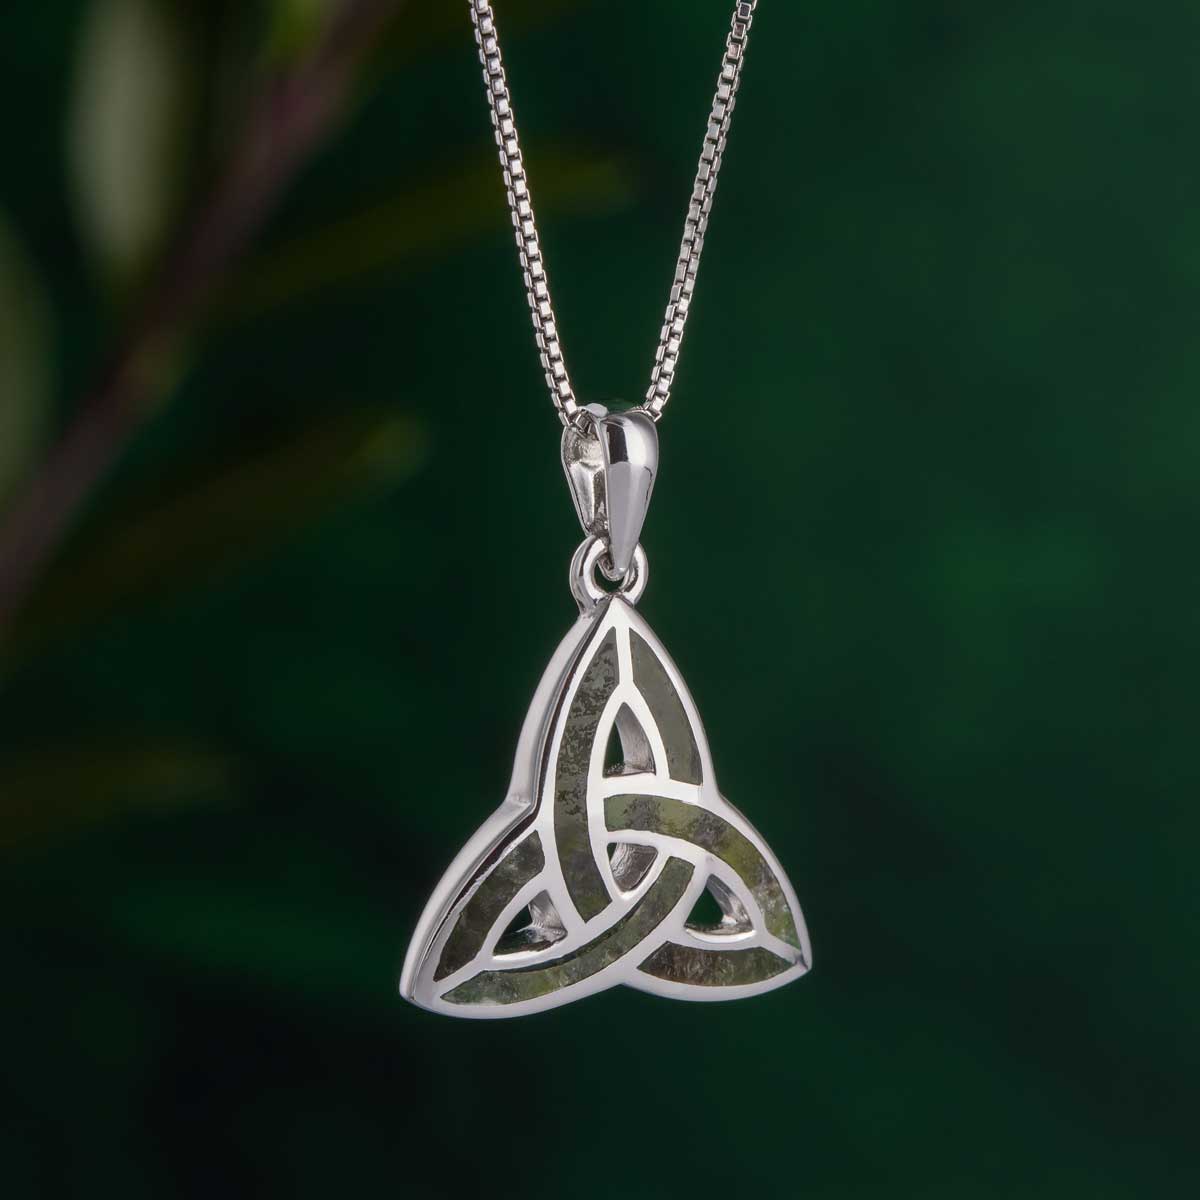 Product image for Celtic Pendant - Sterling Silver and Connemara Marble Trinity Knot Pendant with Chain